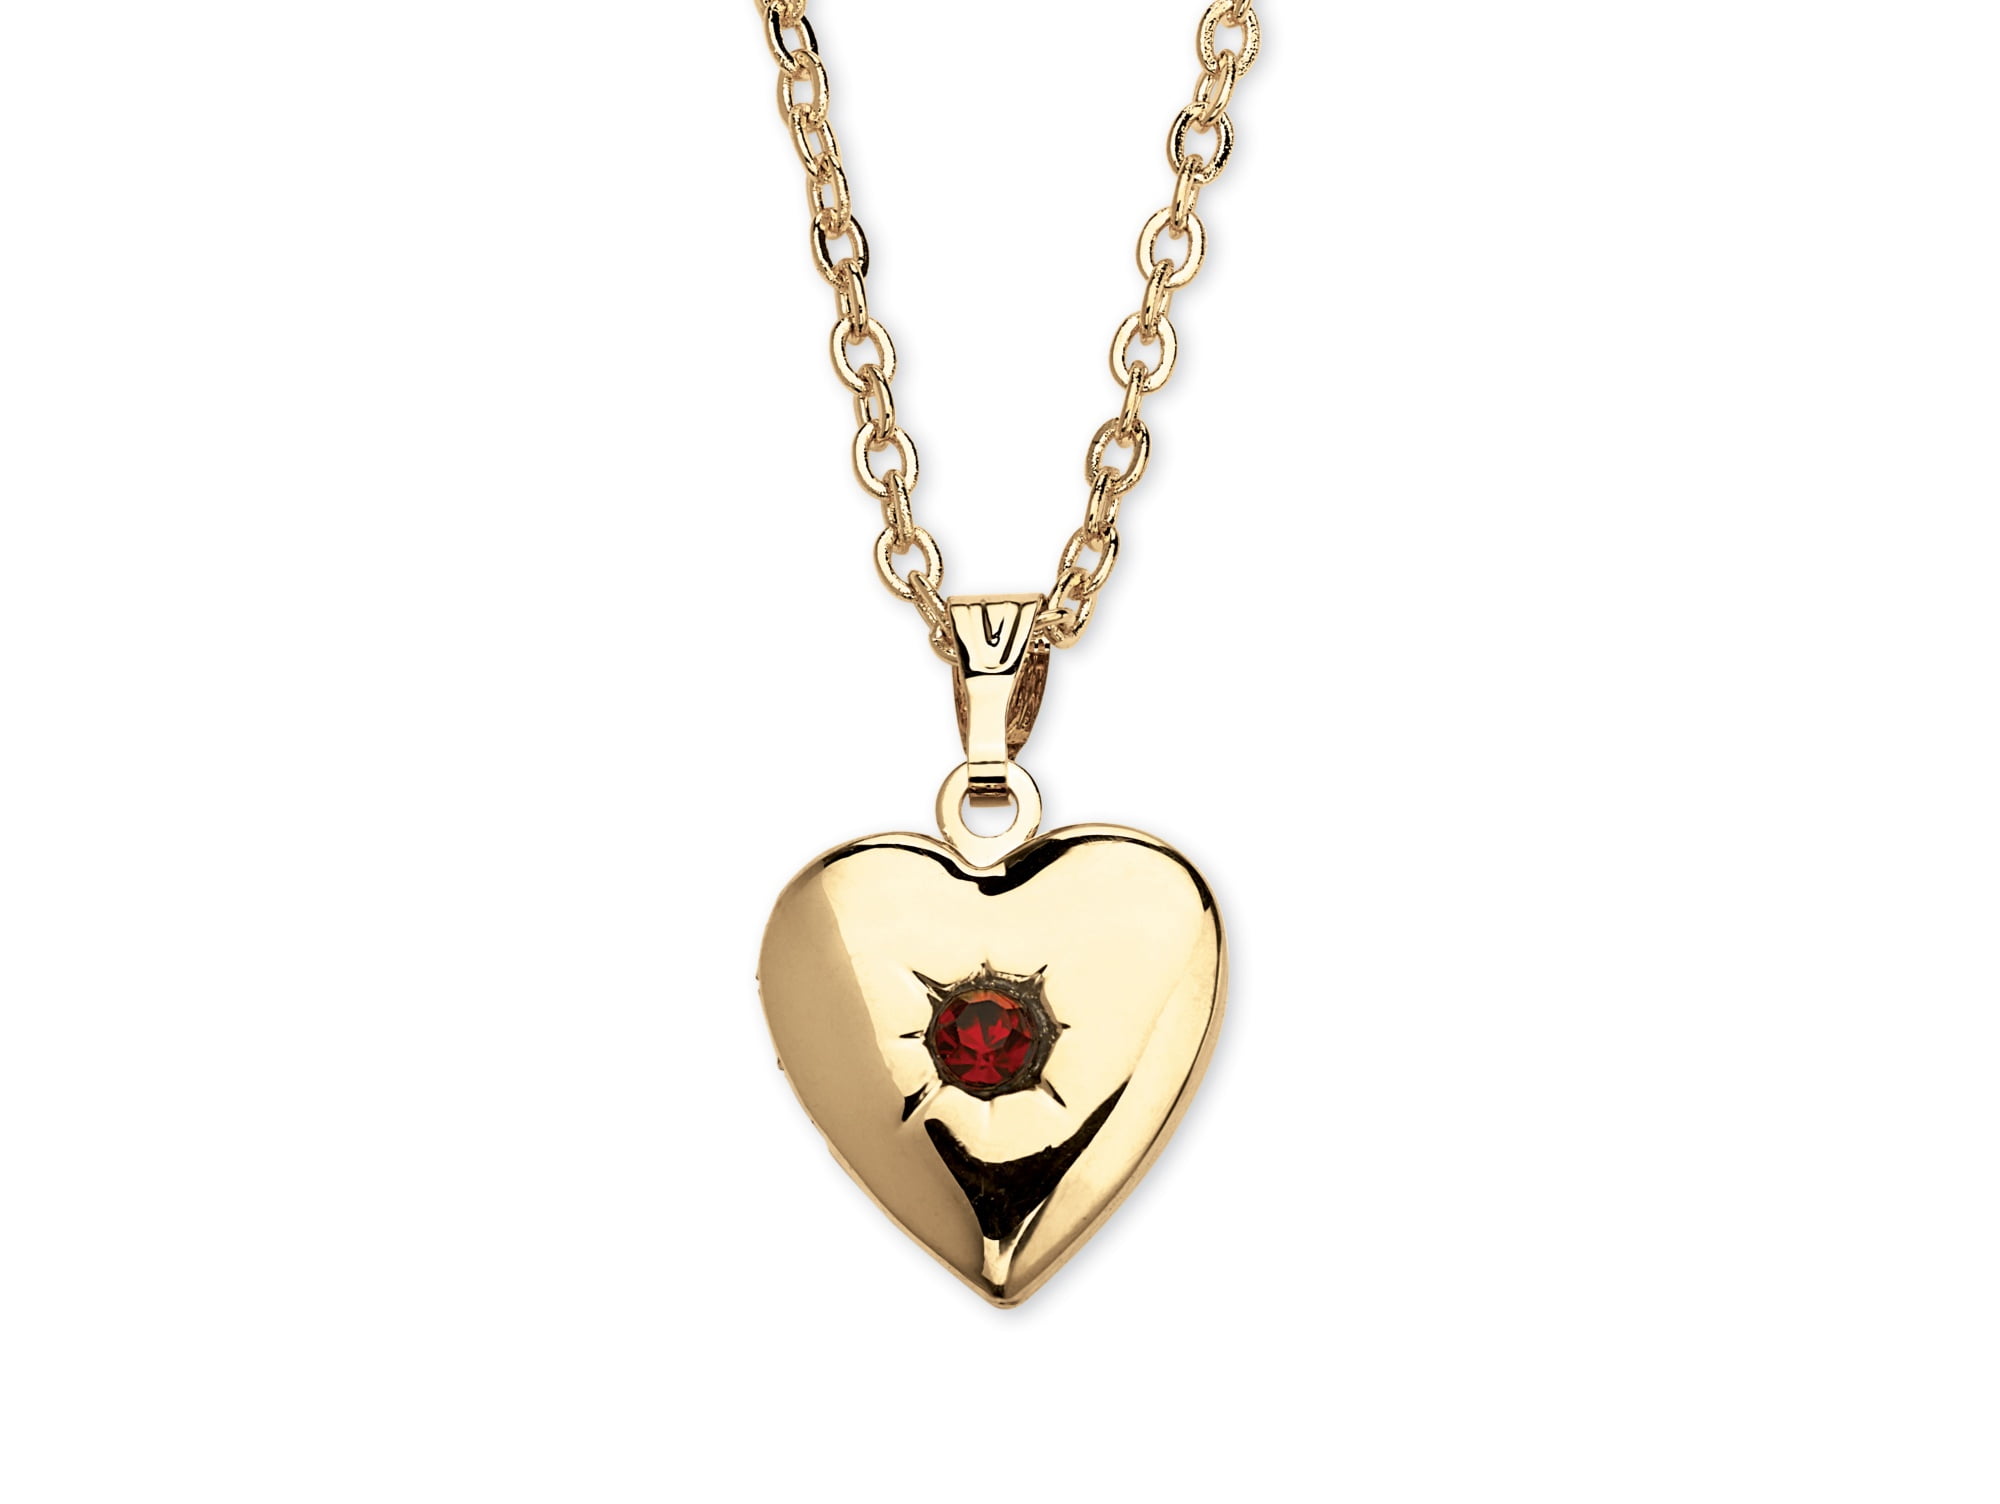 Sterling Silver & CZ Crystal Engravable Heart Locket on Chain 16-22 Inches